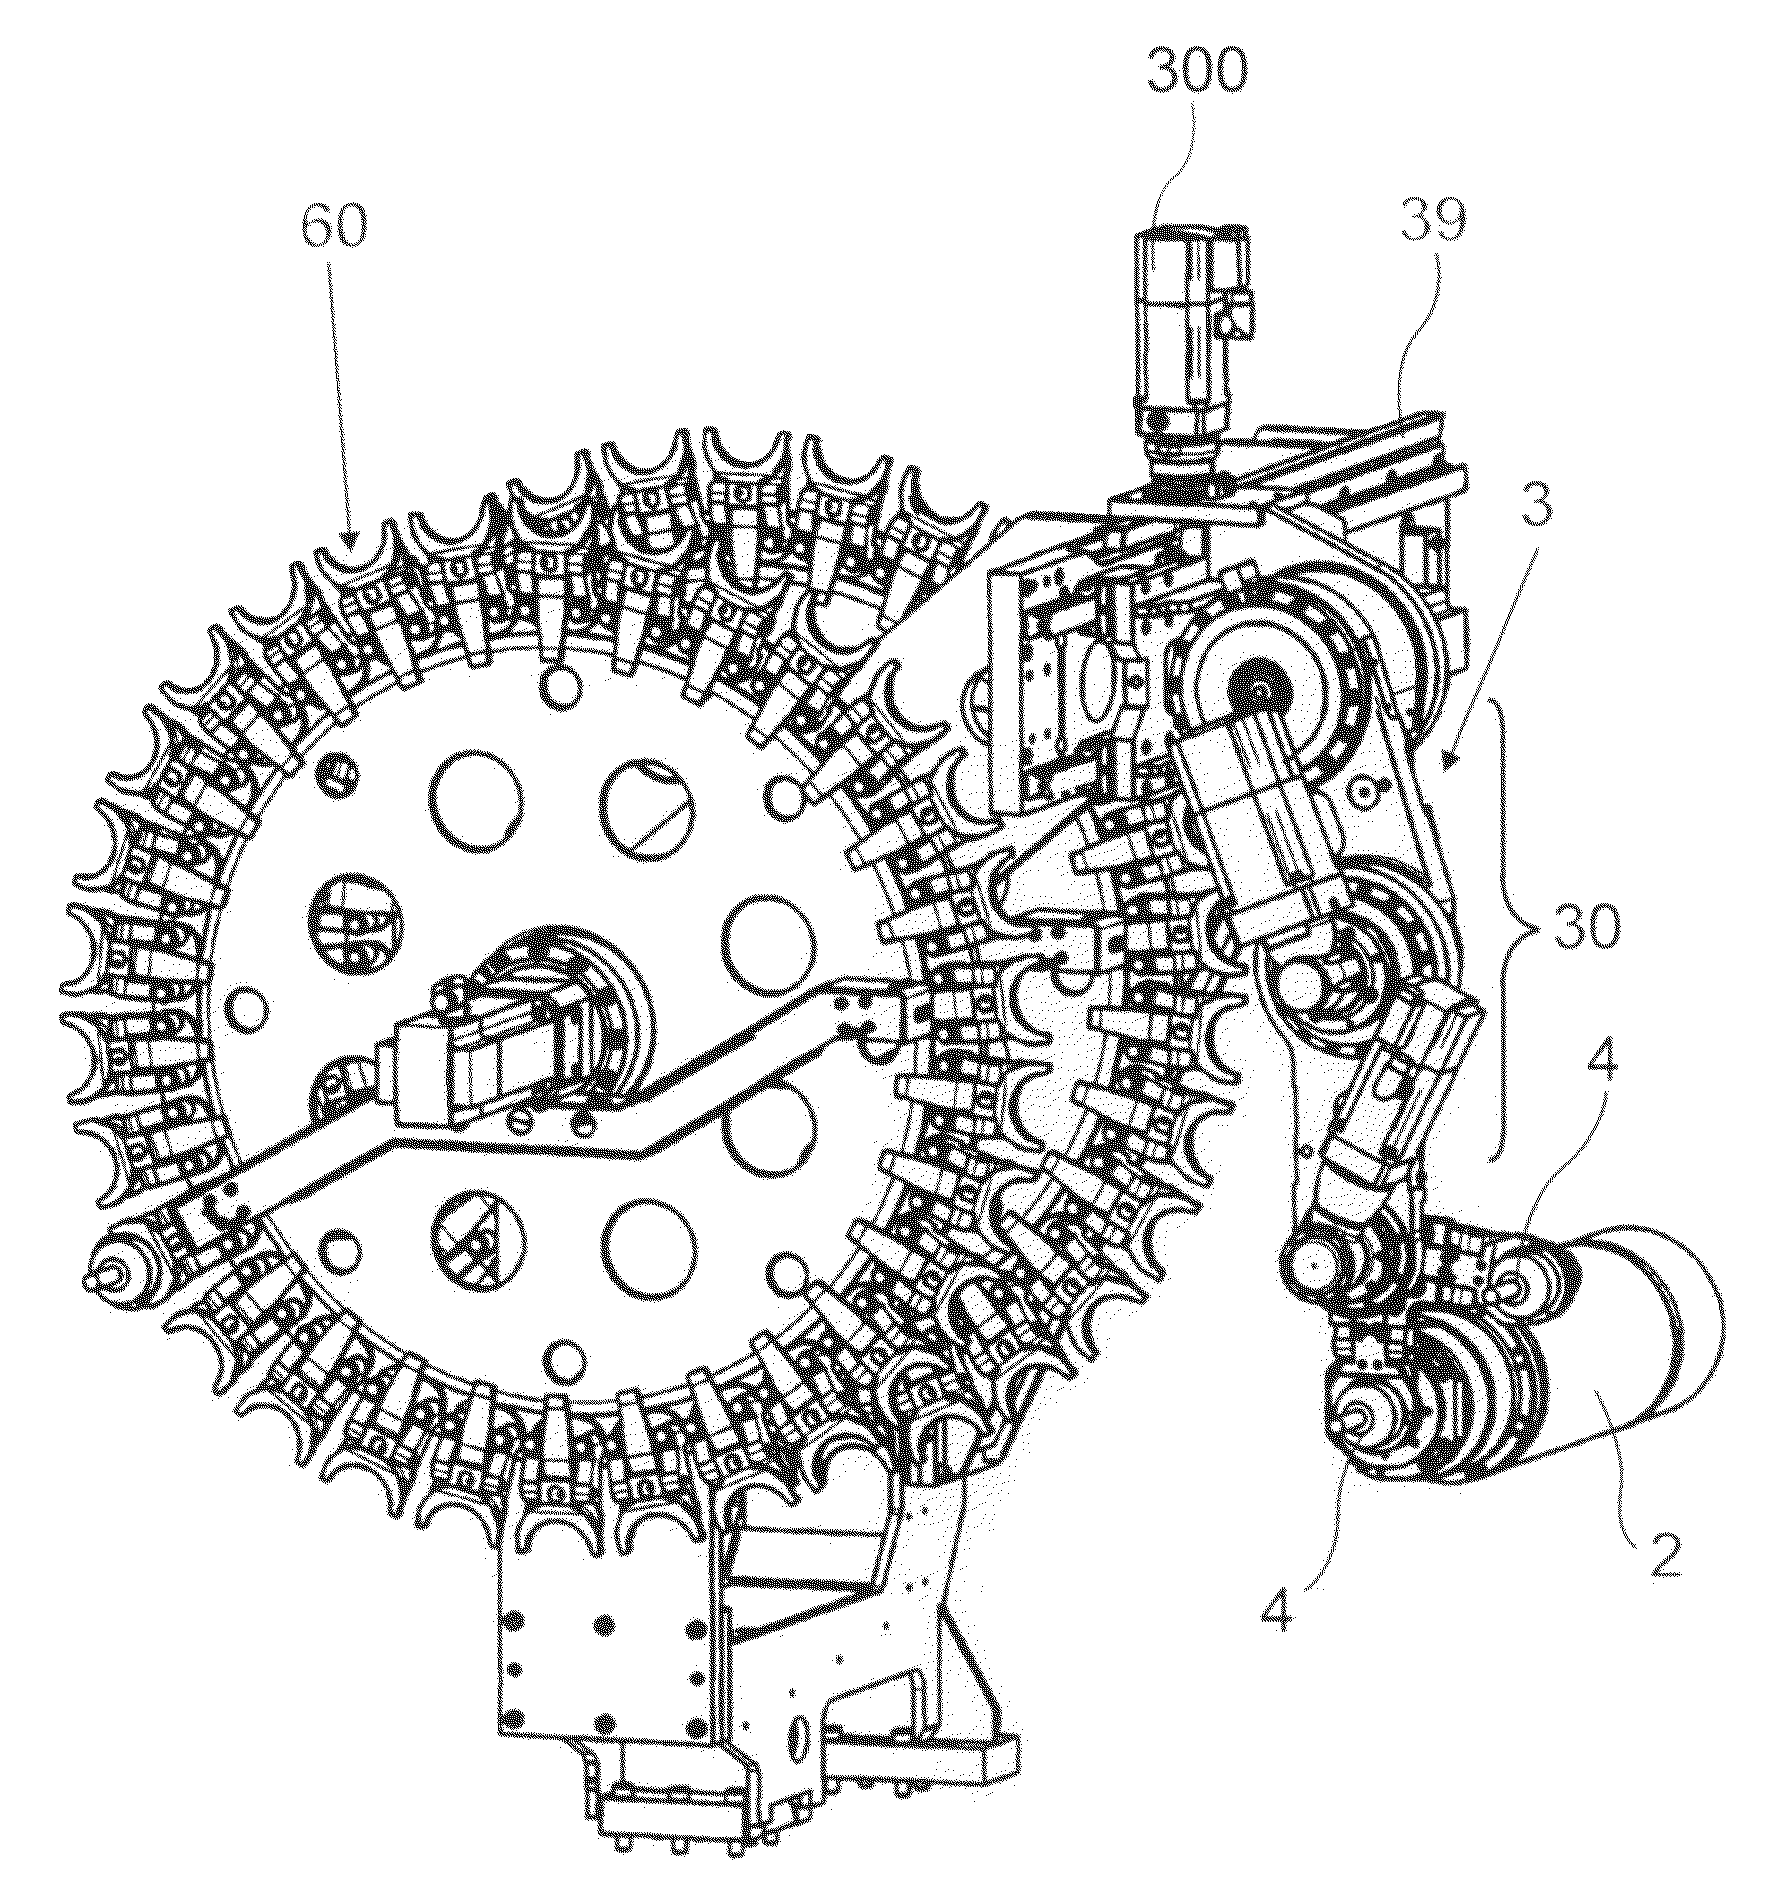 Machine tool with a tool changing device